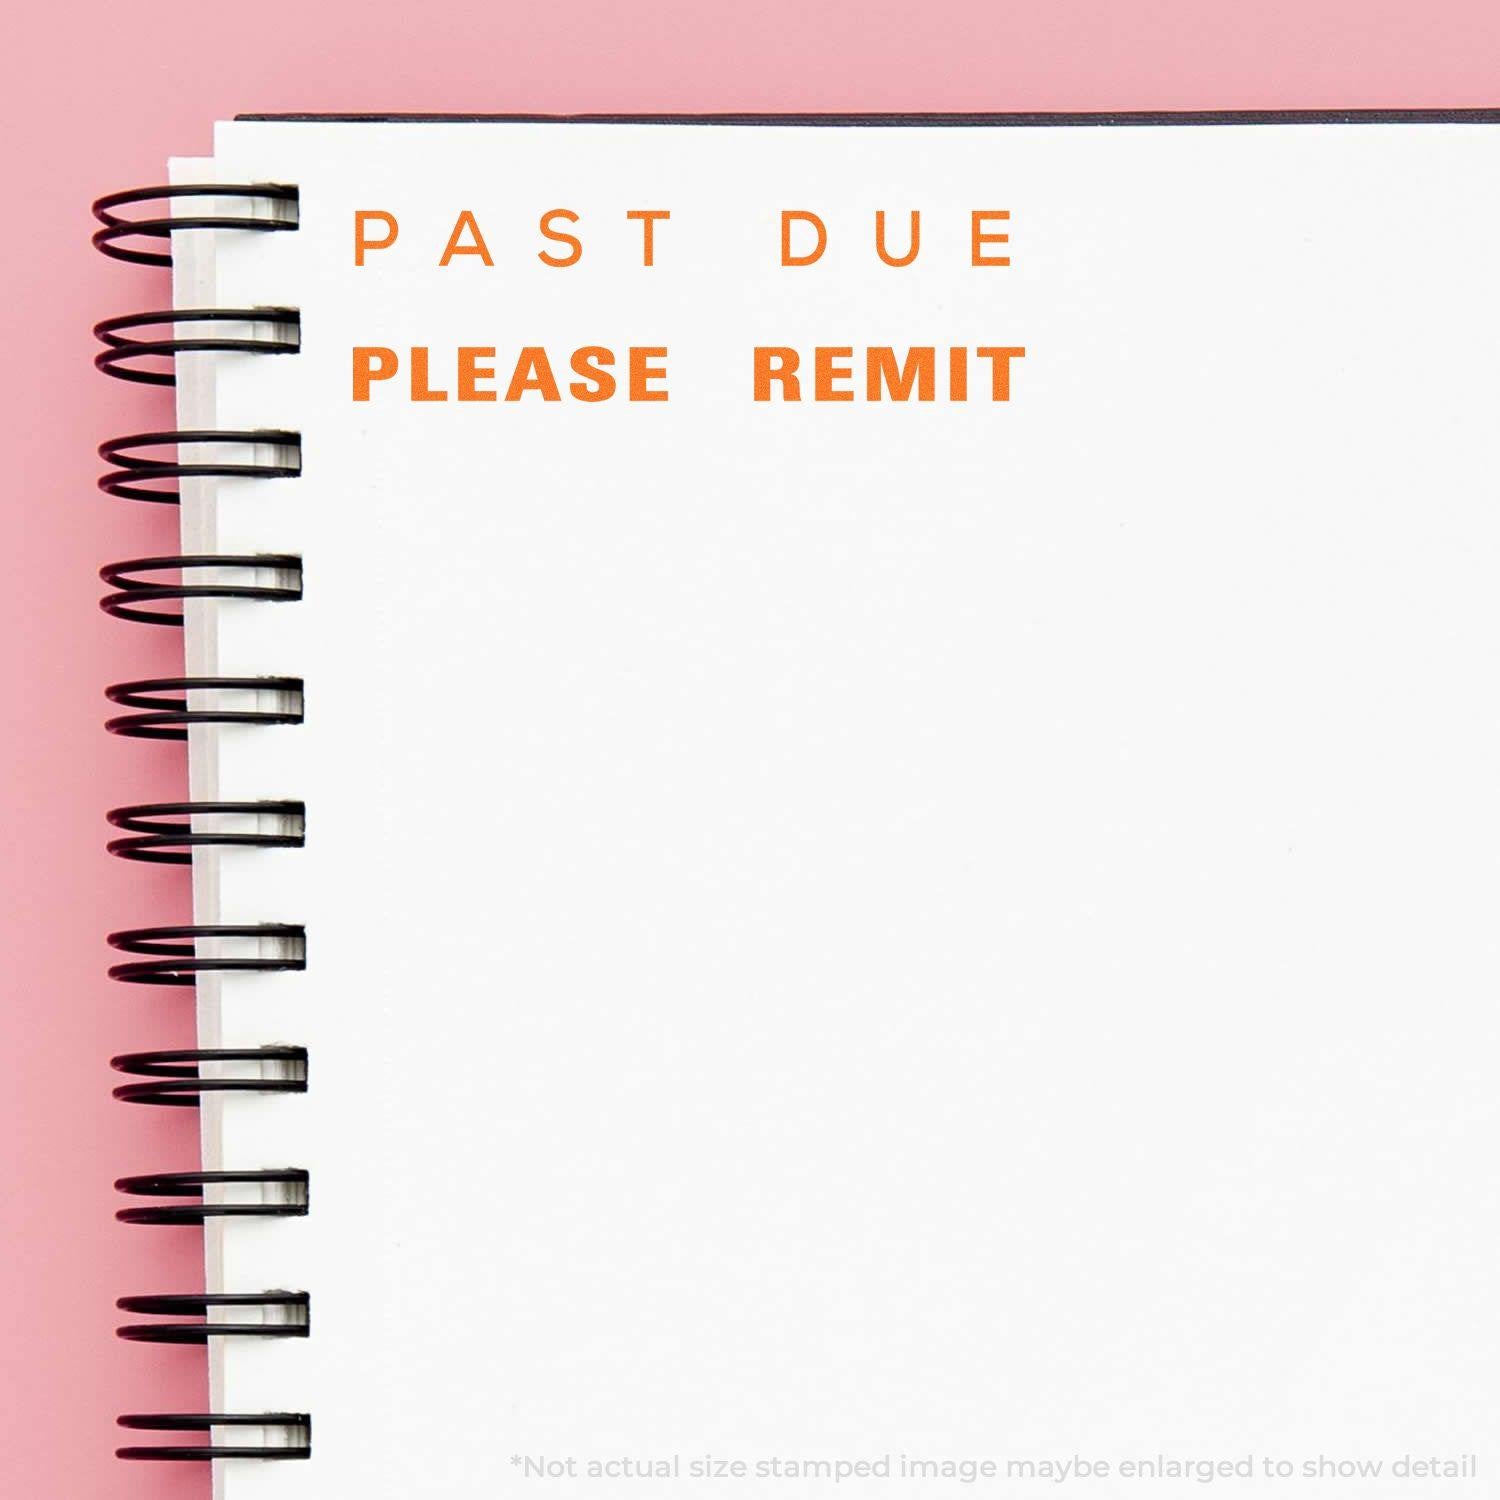 A stock office rubber stamp with a stamped image showing how the text "PAST DUE PLEASE REMIT" in a large font ("PAST DUE" in a narrow font and "PLEASE REMIT" in a bold font) is displayed after stamping.